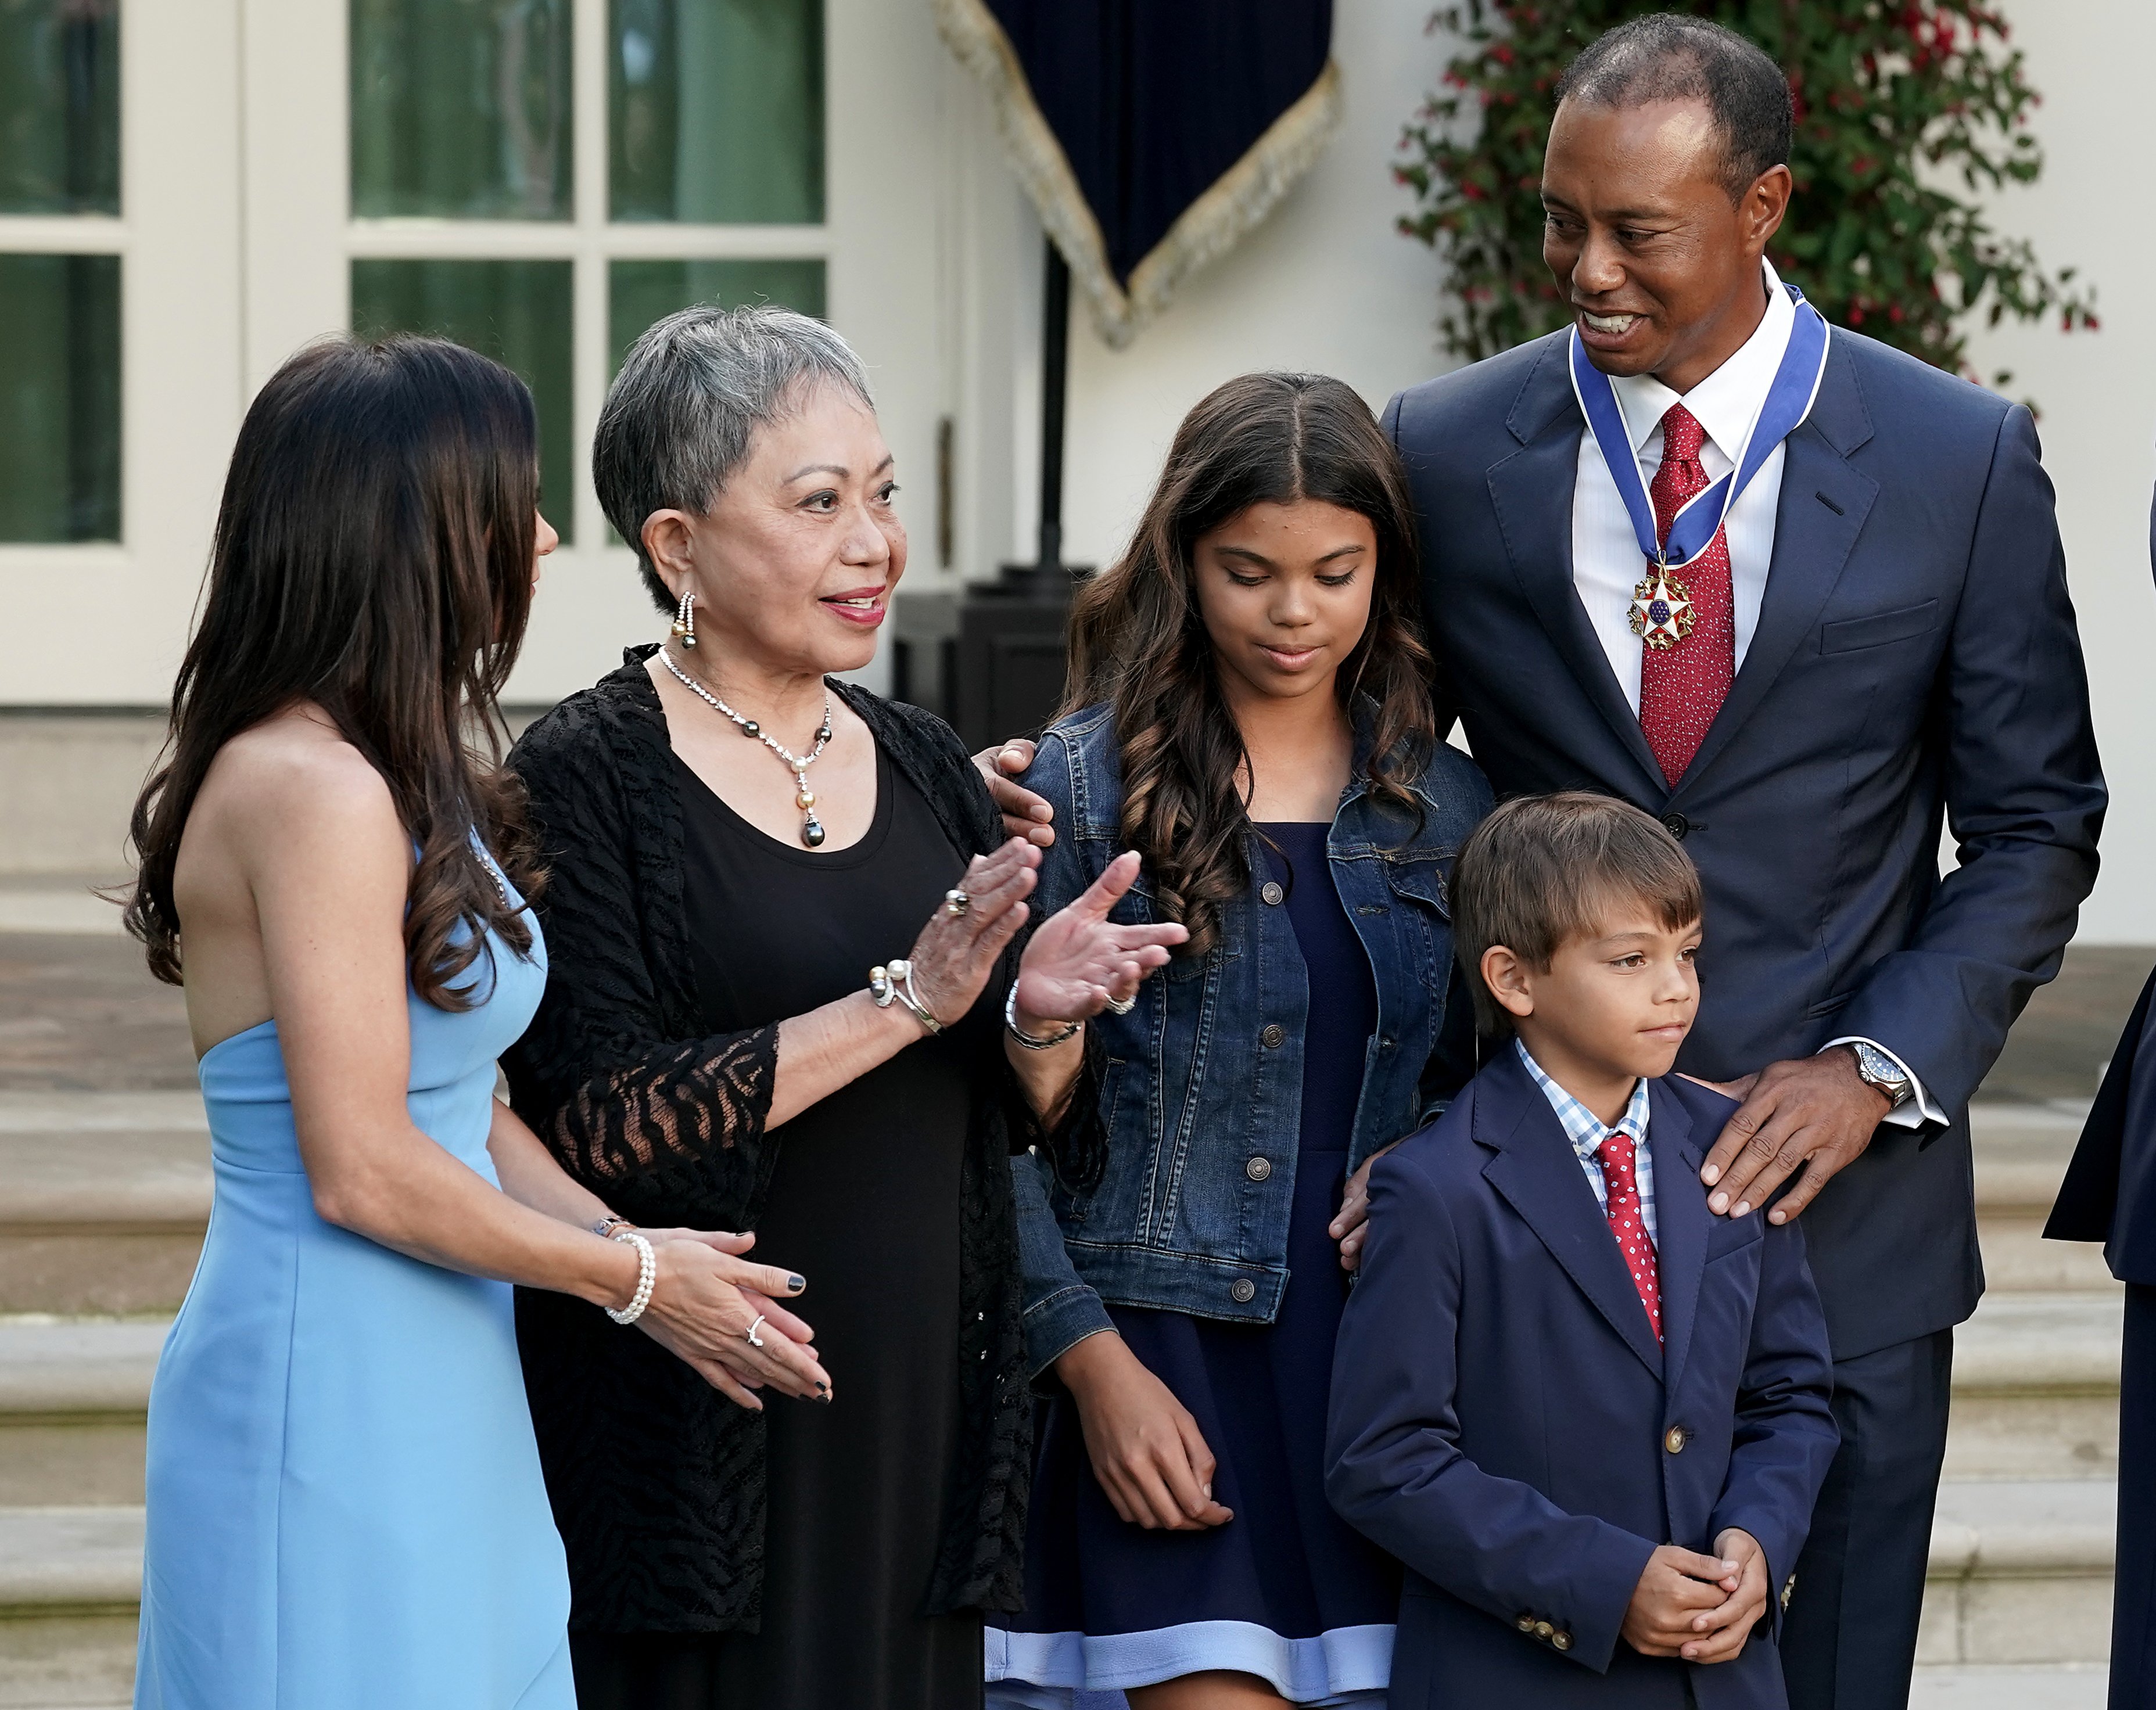 Tiger Woods (R) is joined by his mom Kultida Woods (2nd L), children Sam Alexis Woods and Charlie Axel Woods and girlfriend Erica Herman during his Medal of Freedom ceremony in the Rose Garden, at the White House, May 6, 2019, in Washington, DC. | Source: Getty Images